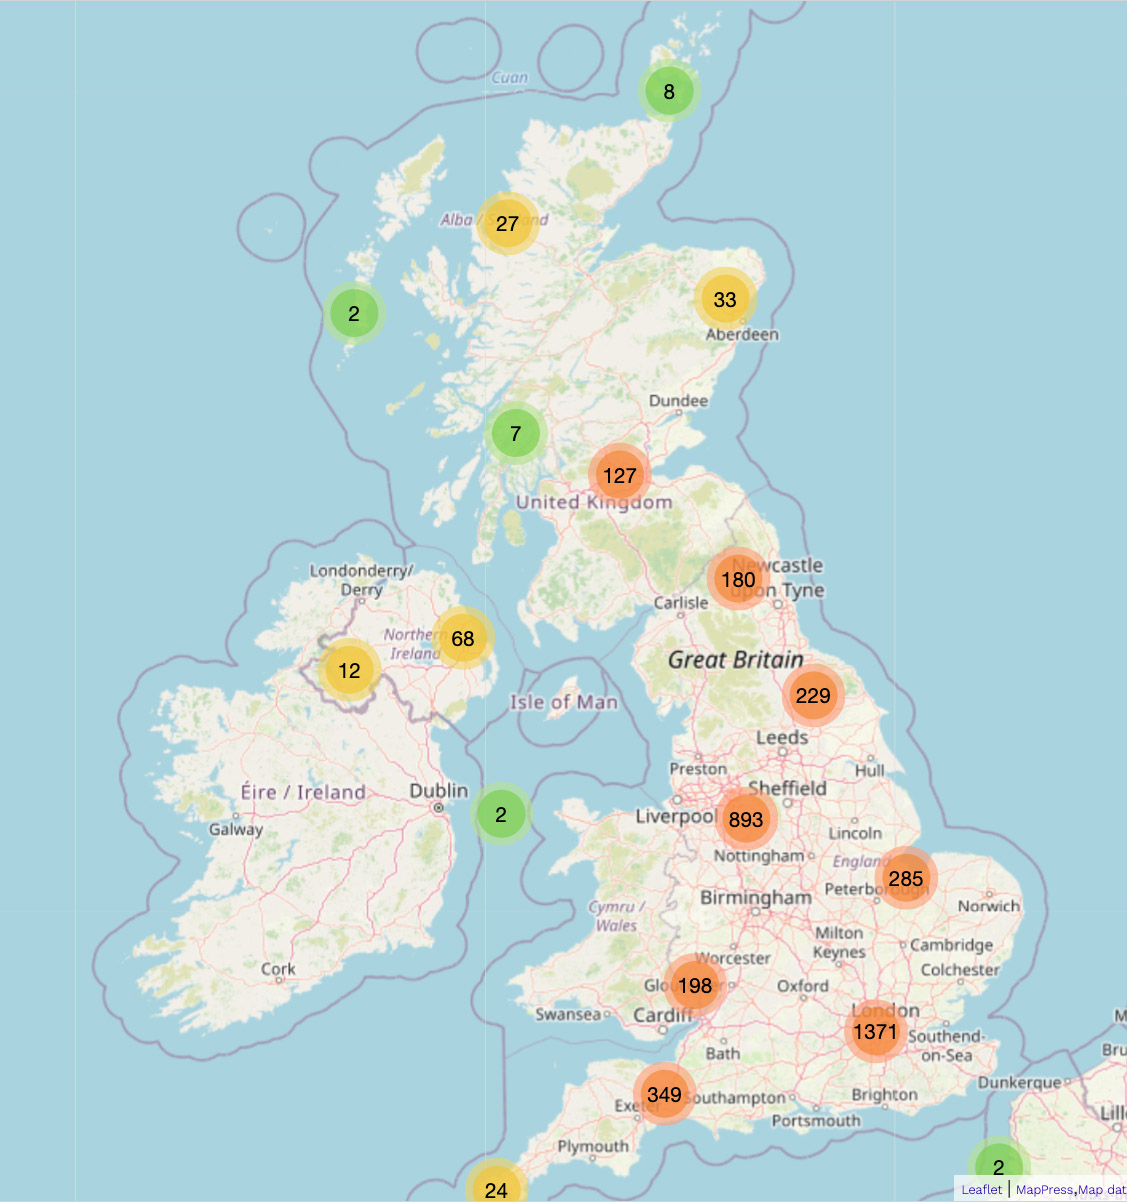 Map of UK showing clustered pins